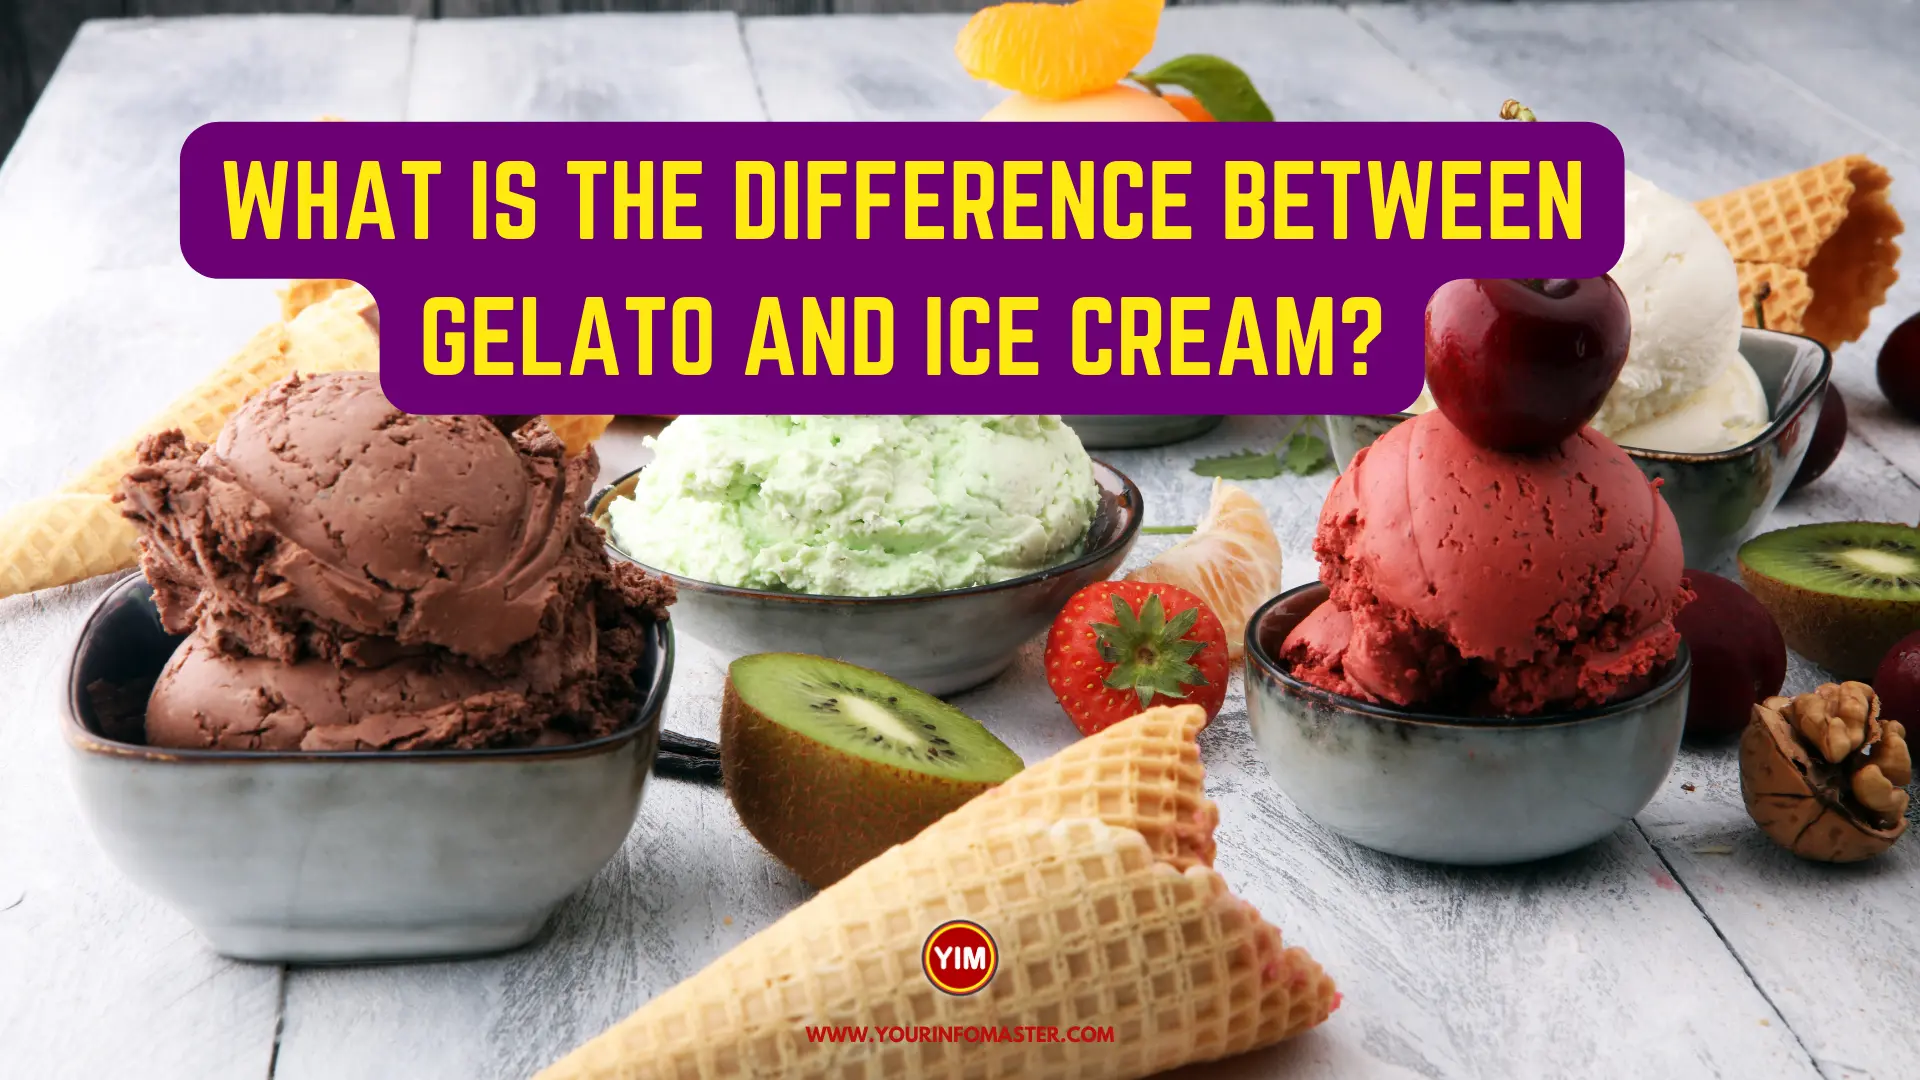 What is the Difference Between Gelato and Ice Cream